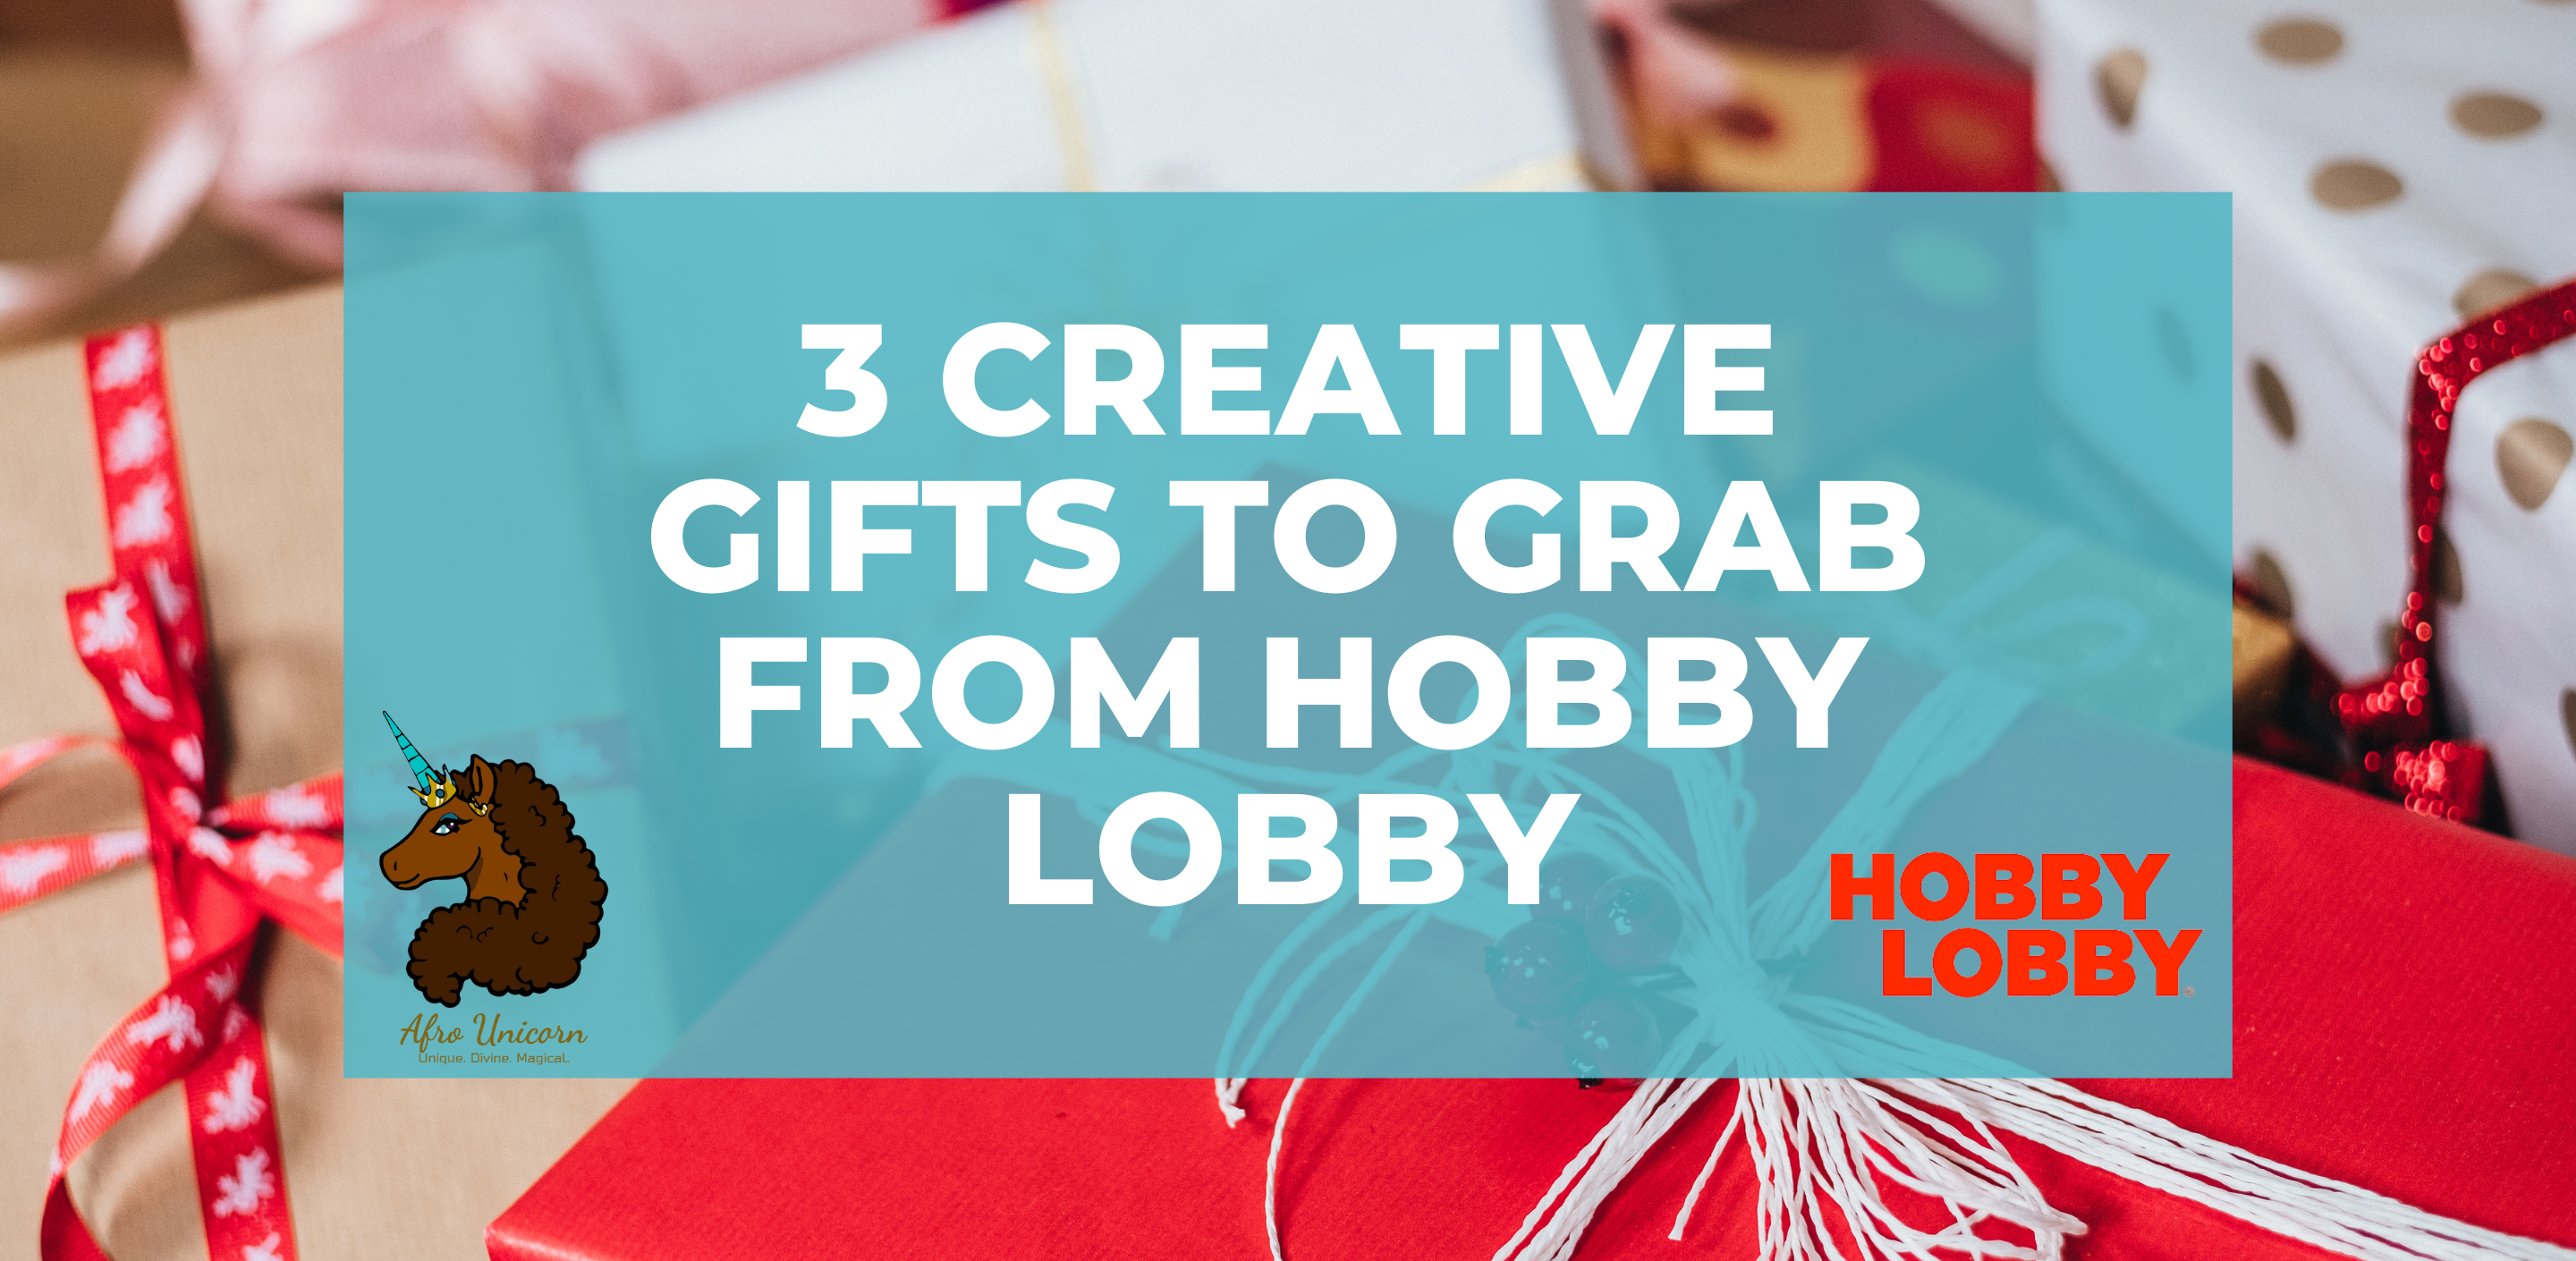 3 Creative Gifts to Grab from Hobby Lobby